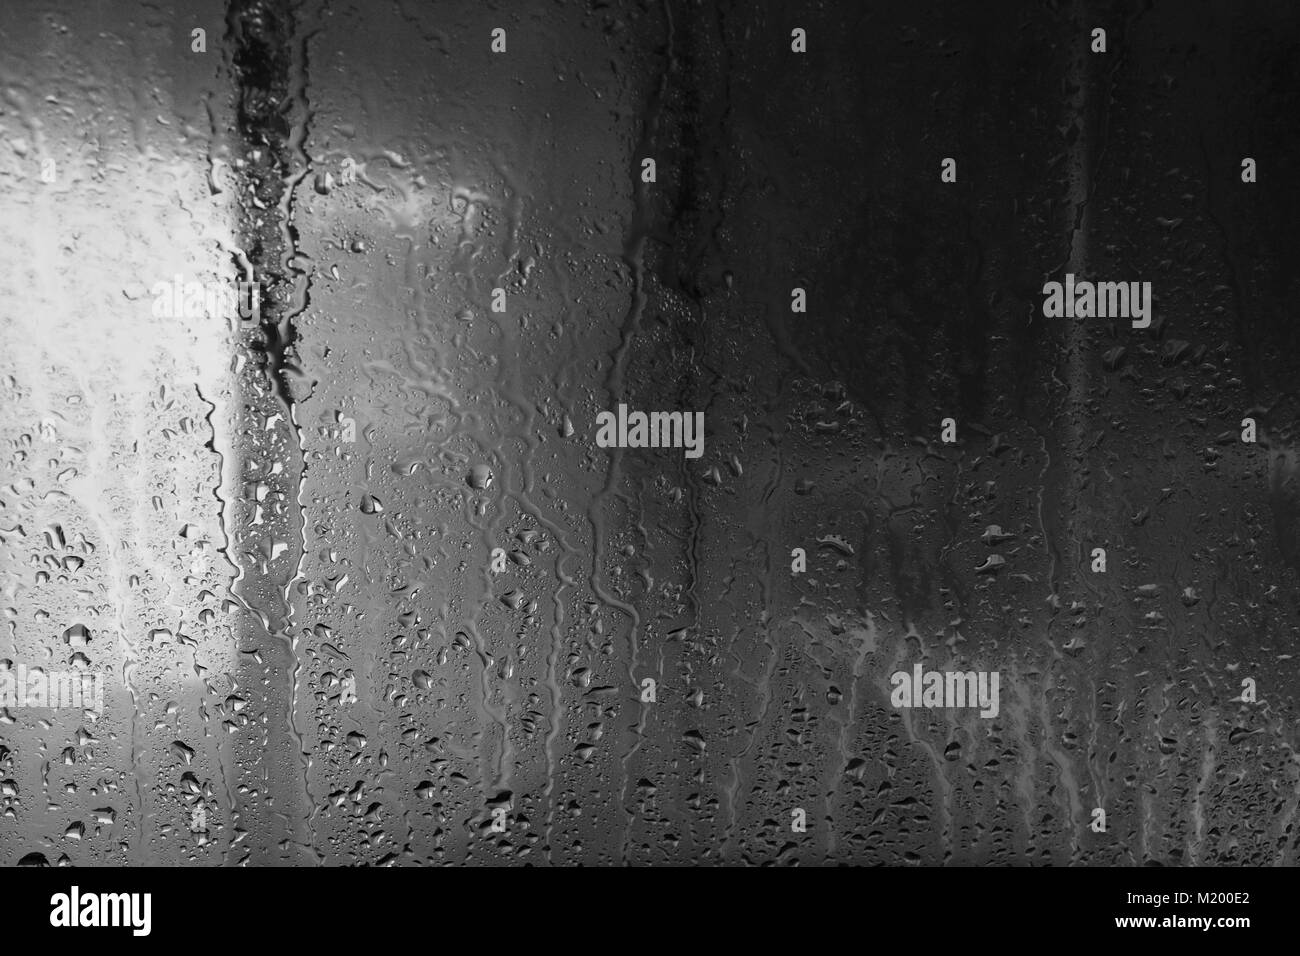 glass window pane with rain and condensation drops Stock Photo